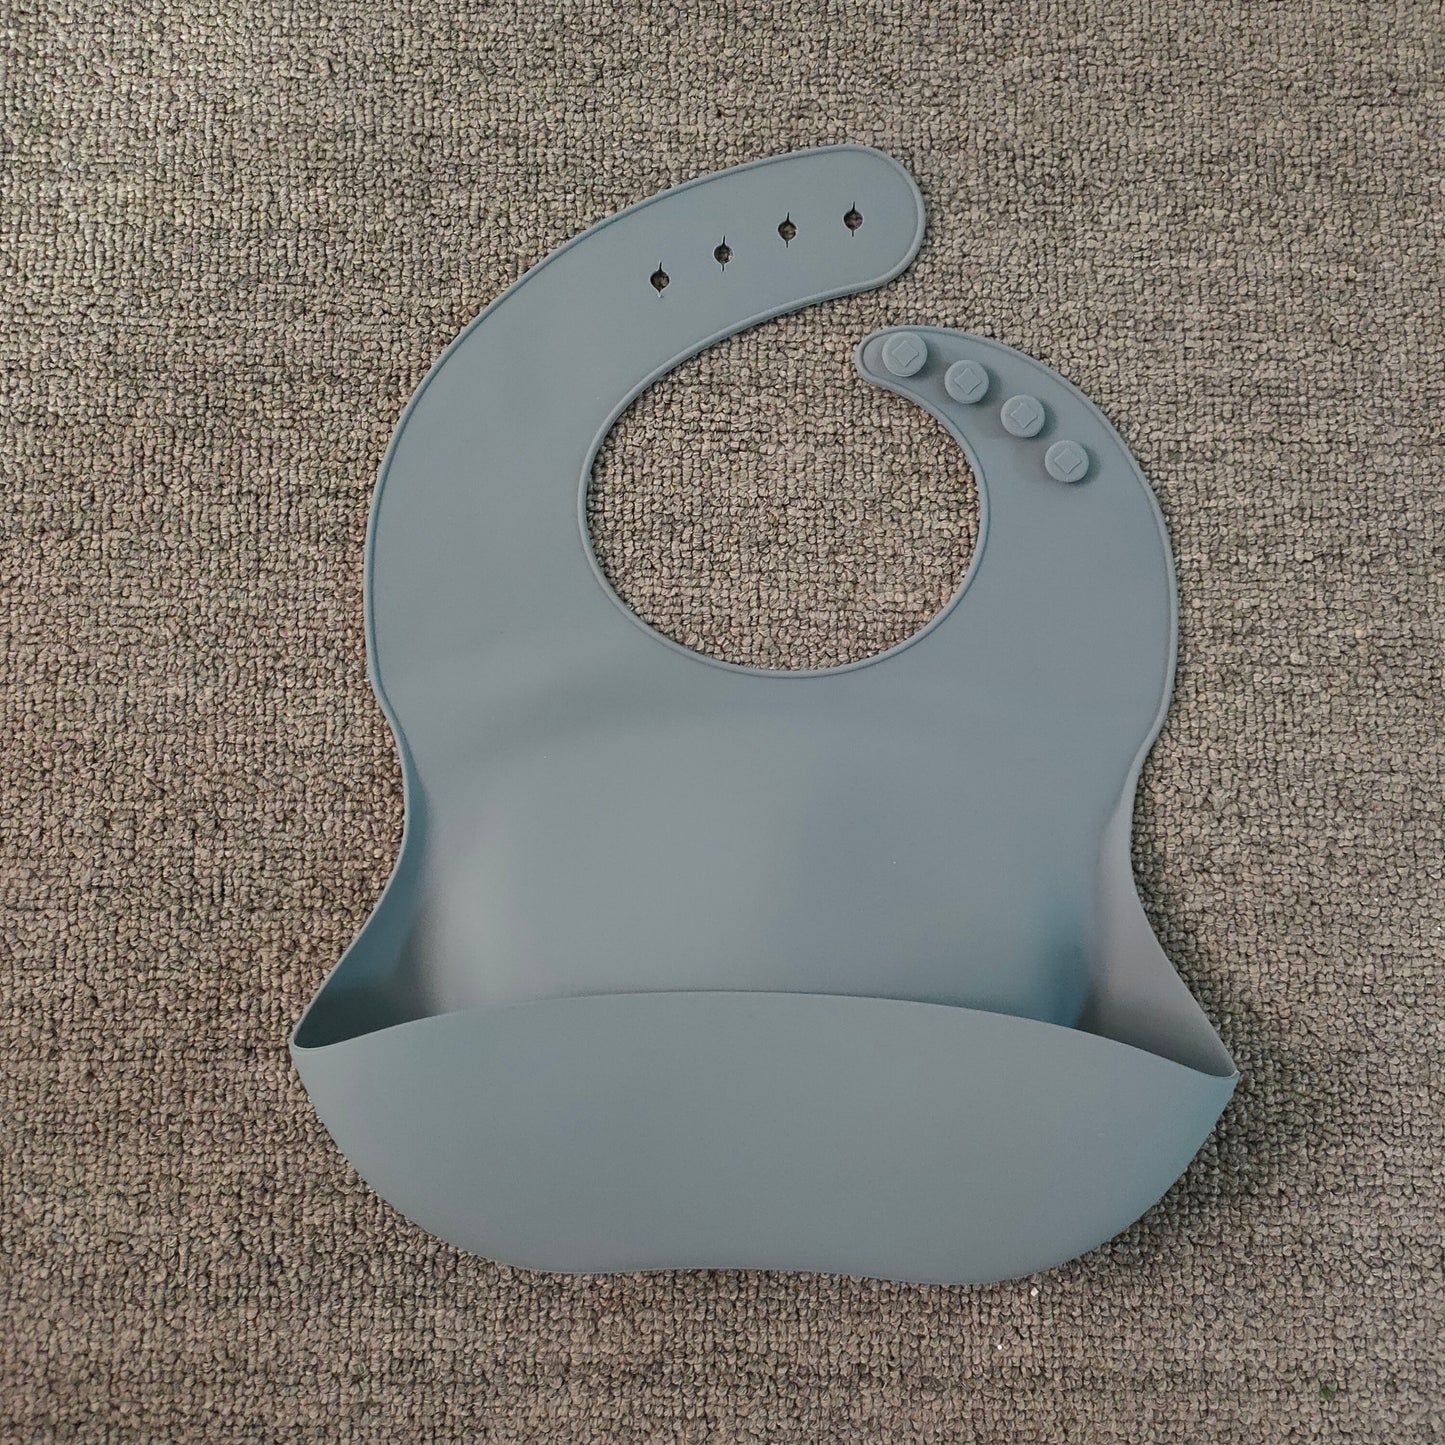 Soft Waterproof Silicone Baby Bib with Food Catcher - MAMTASTIC